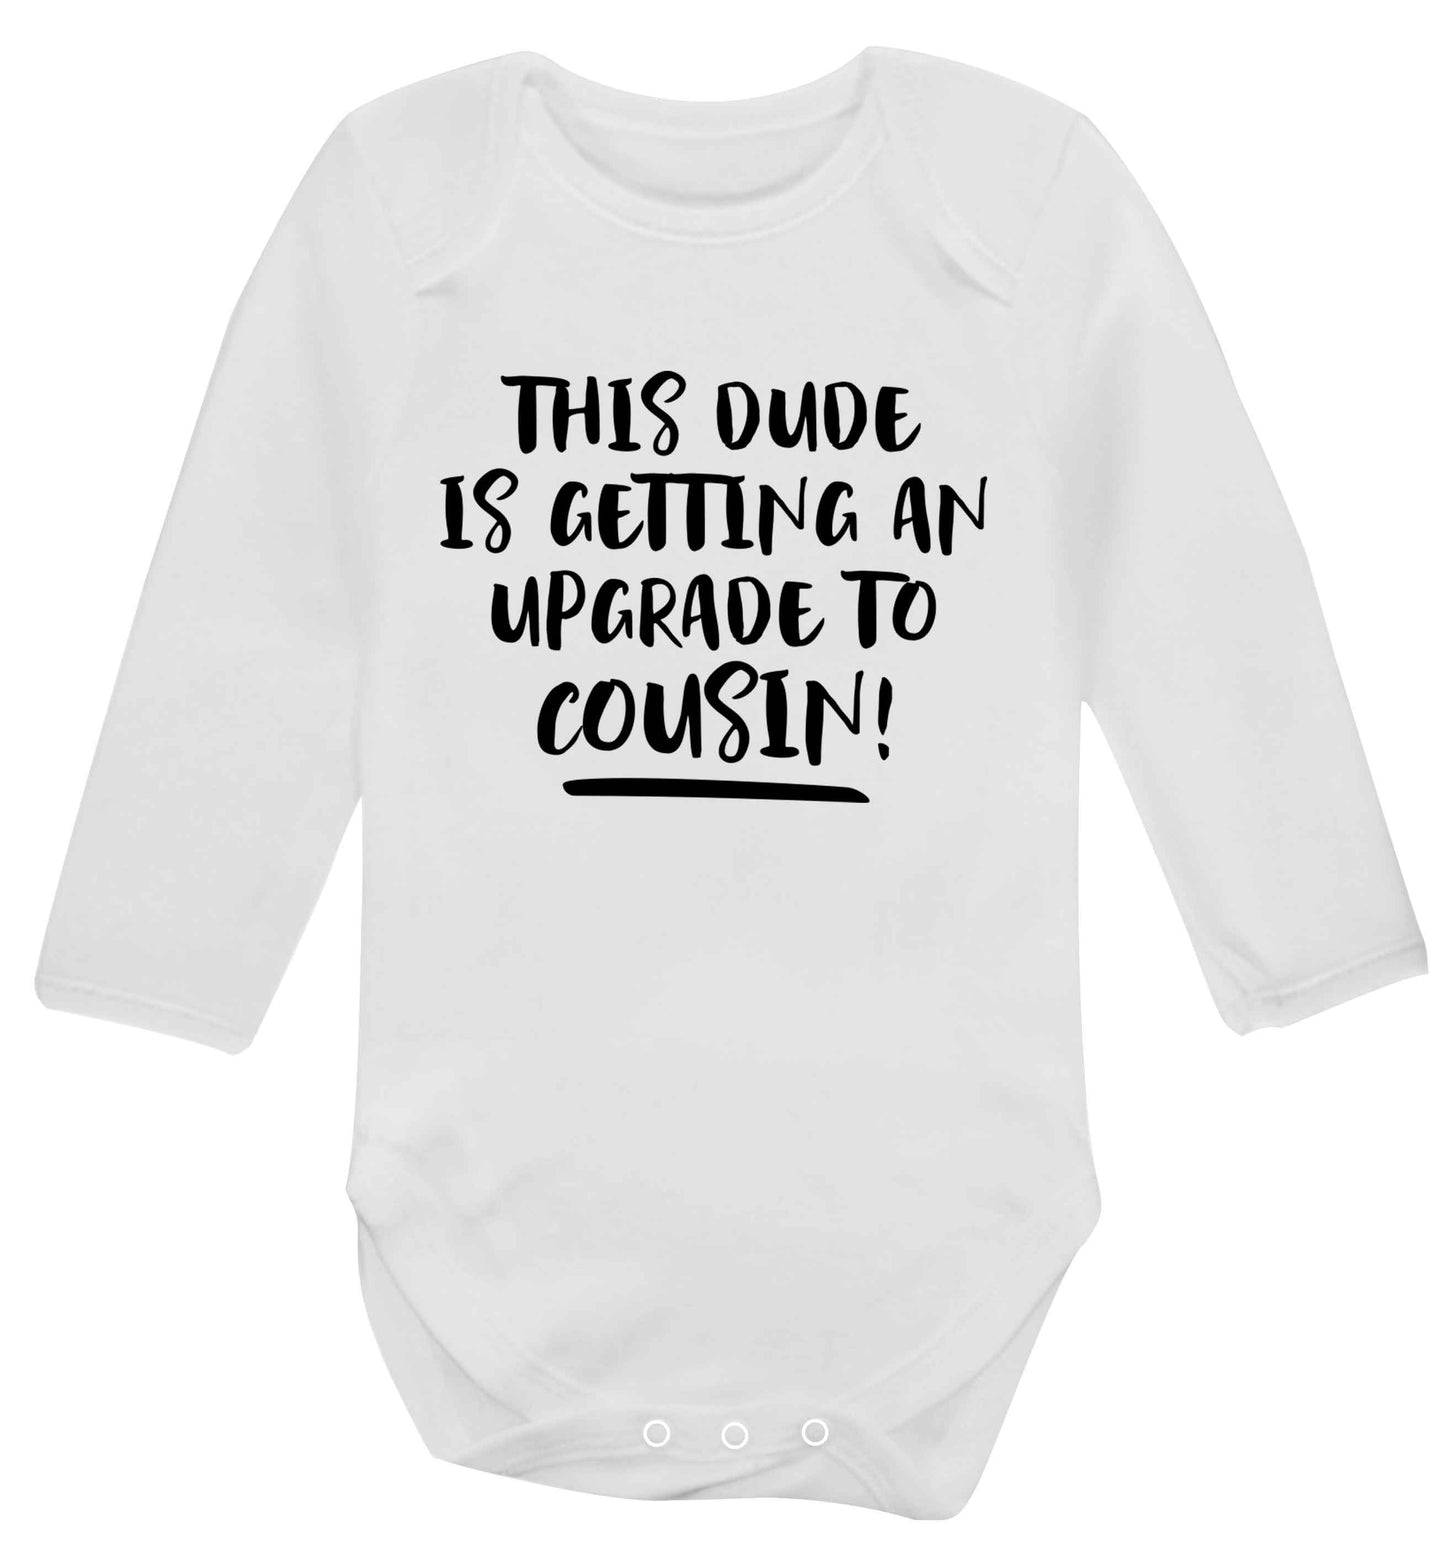 This dude is getting an upgrade to cousin! Baby Vest long sleeved white 6-12 months